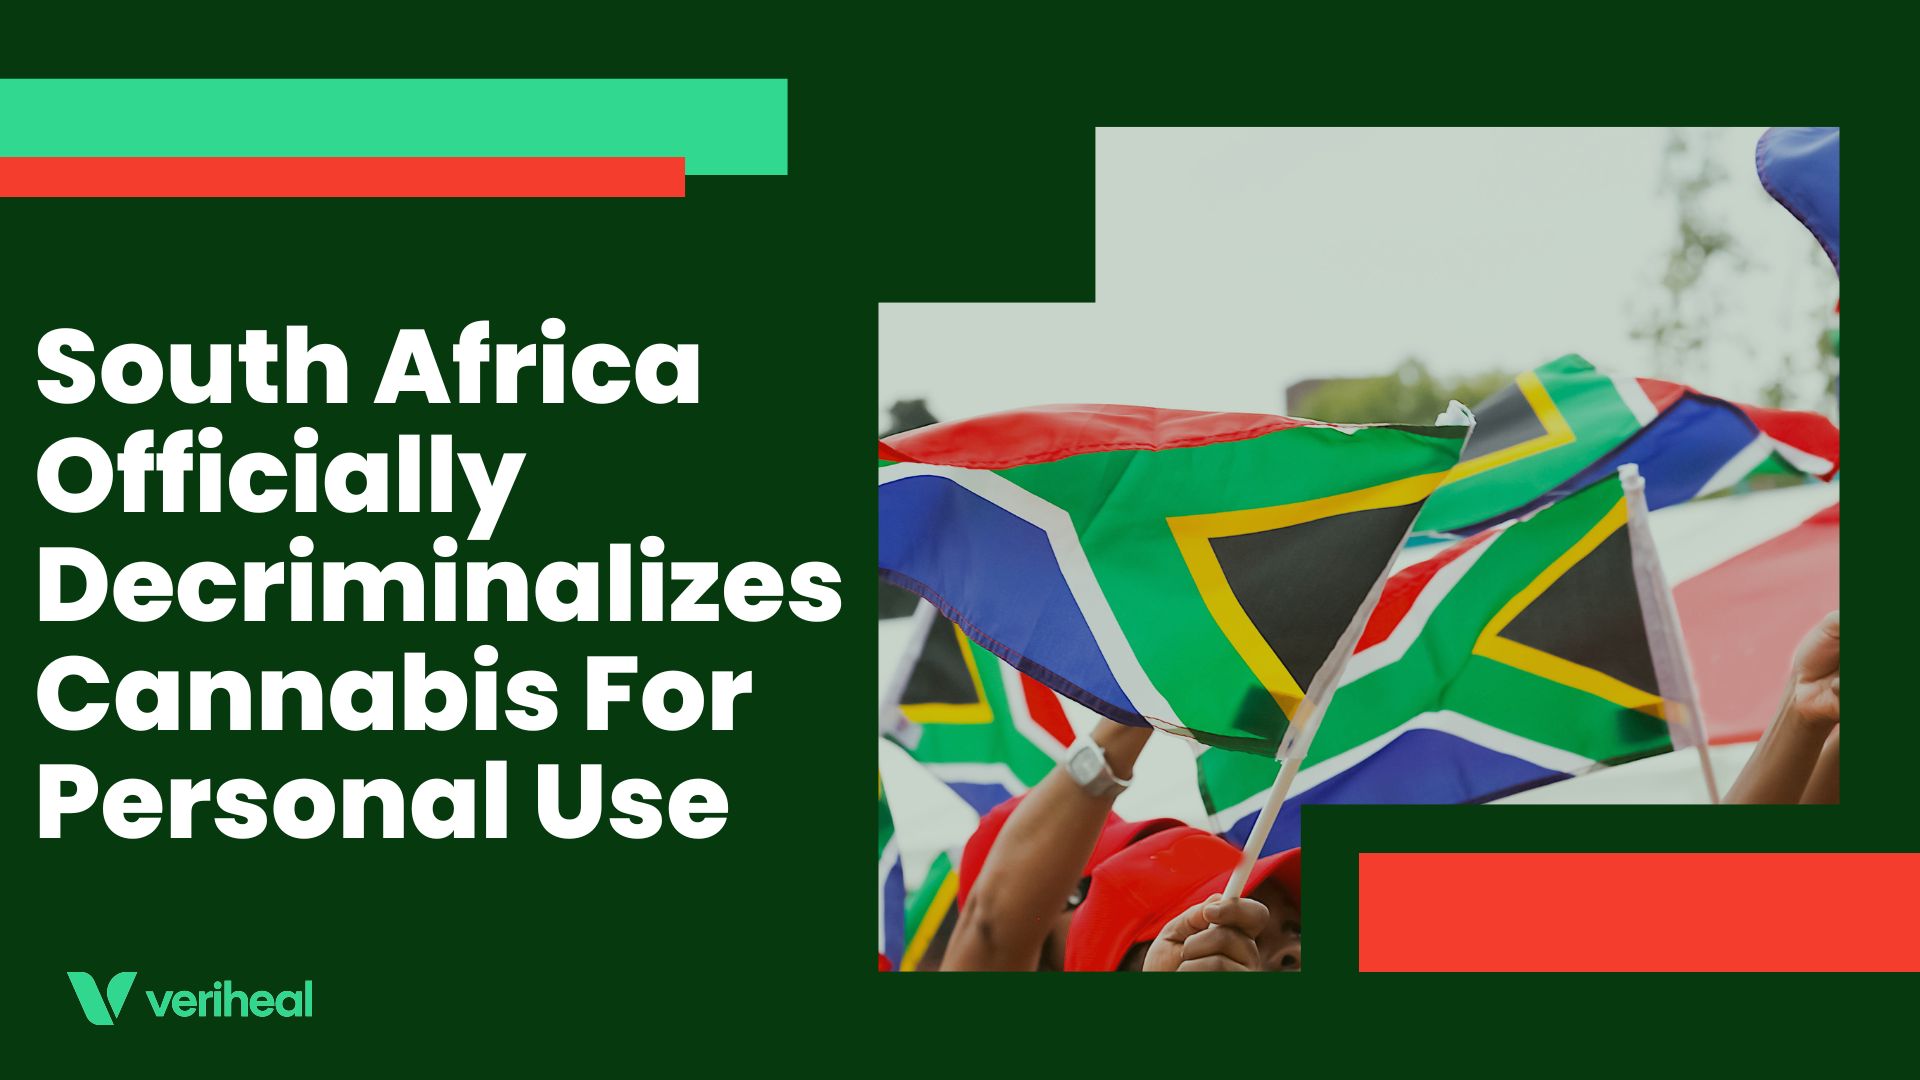 South Africa Officially Decriminalizes Cannabis For Personal Use